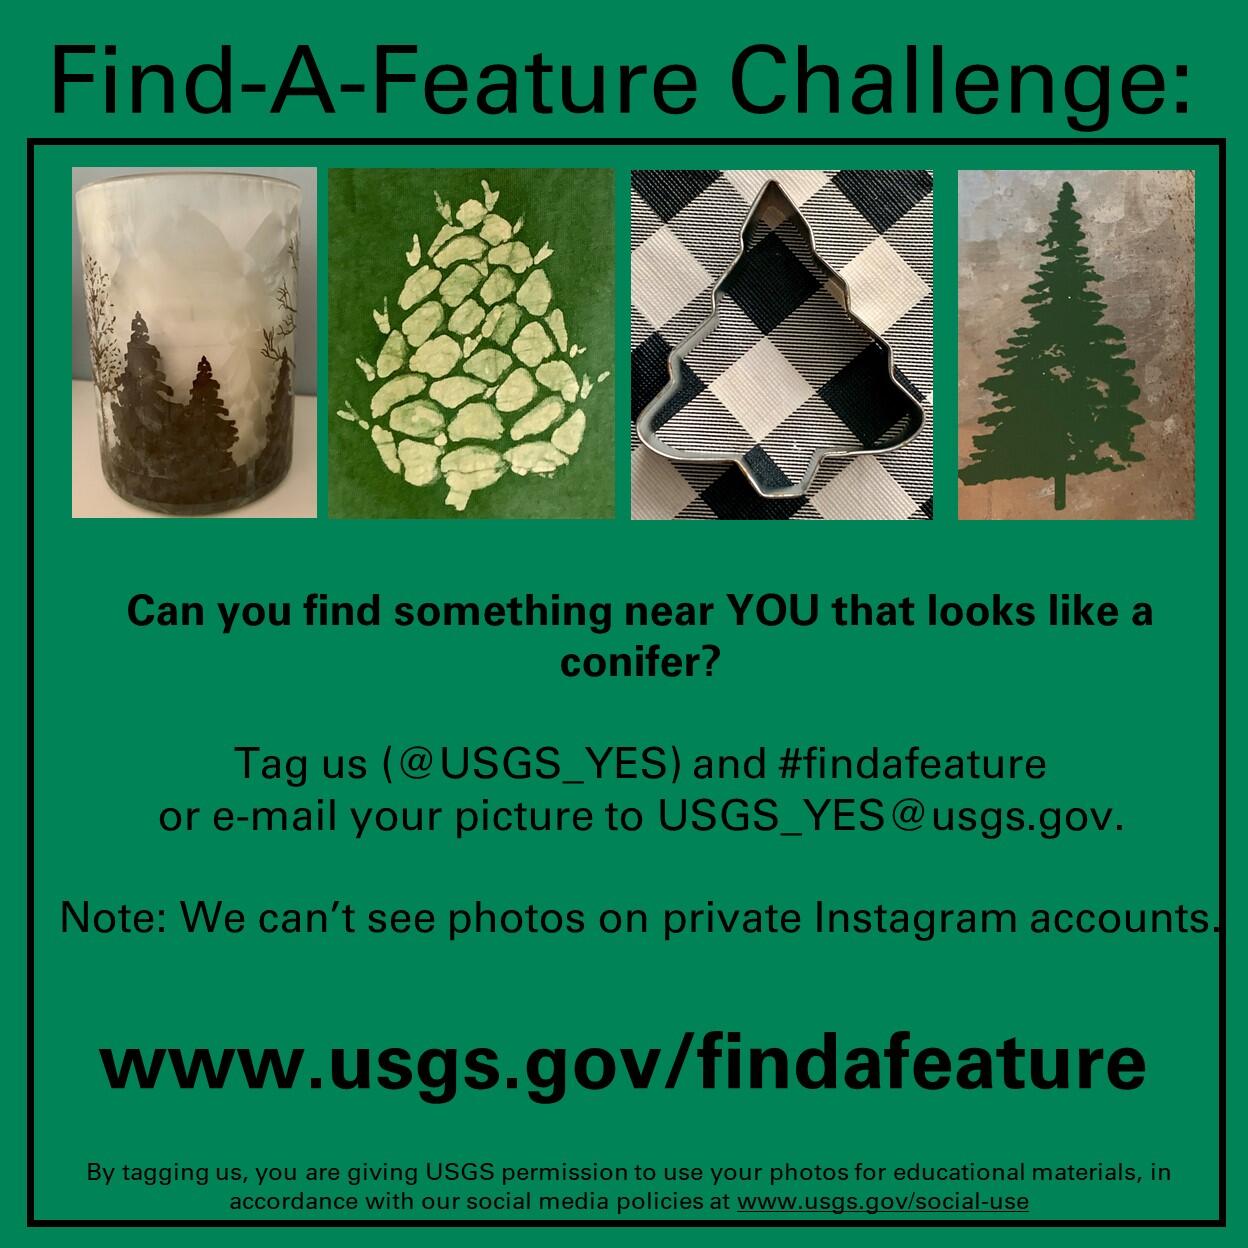 This image shows text about the Find-A-Feature Challenge, three tree shapes, and one cone shape.